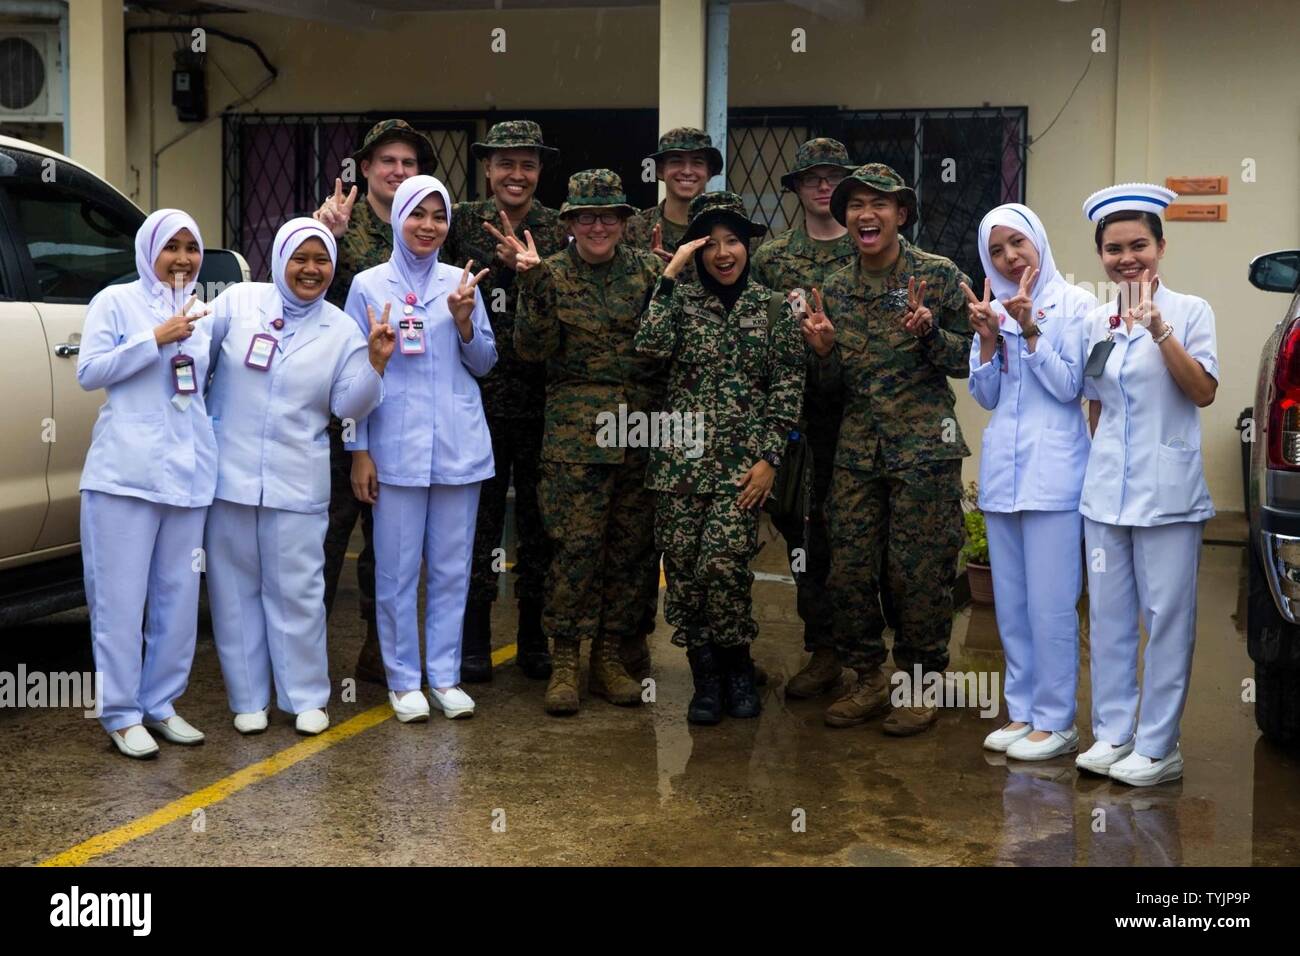 SABAH PROVINCE, Malaysia (November 11, 2016) – U.S. Navy, Malaysian Armed Forces and local Malaysian medical professionals pose for a picture after a medical civil affairs project during Exercise Tiger Strike 2016 in Sabah Province, Malaysia, Nov. 11. During the project, the local Malaysian nurses gave the Navy personnel a tour of the clinic and discussed their daily operations. The Navy personnel are with Combat Logistics Battalion 11, 11th Marine Expeditionary Unit. The 11th MEU, part of the Makin Island Amphibious Ready Group, is operating in the U.S. 7th Fleet area of operations in support Stock Photo